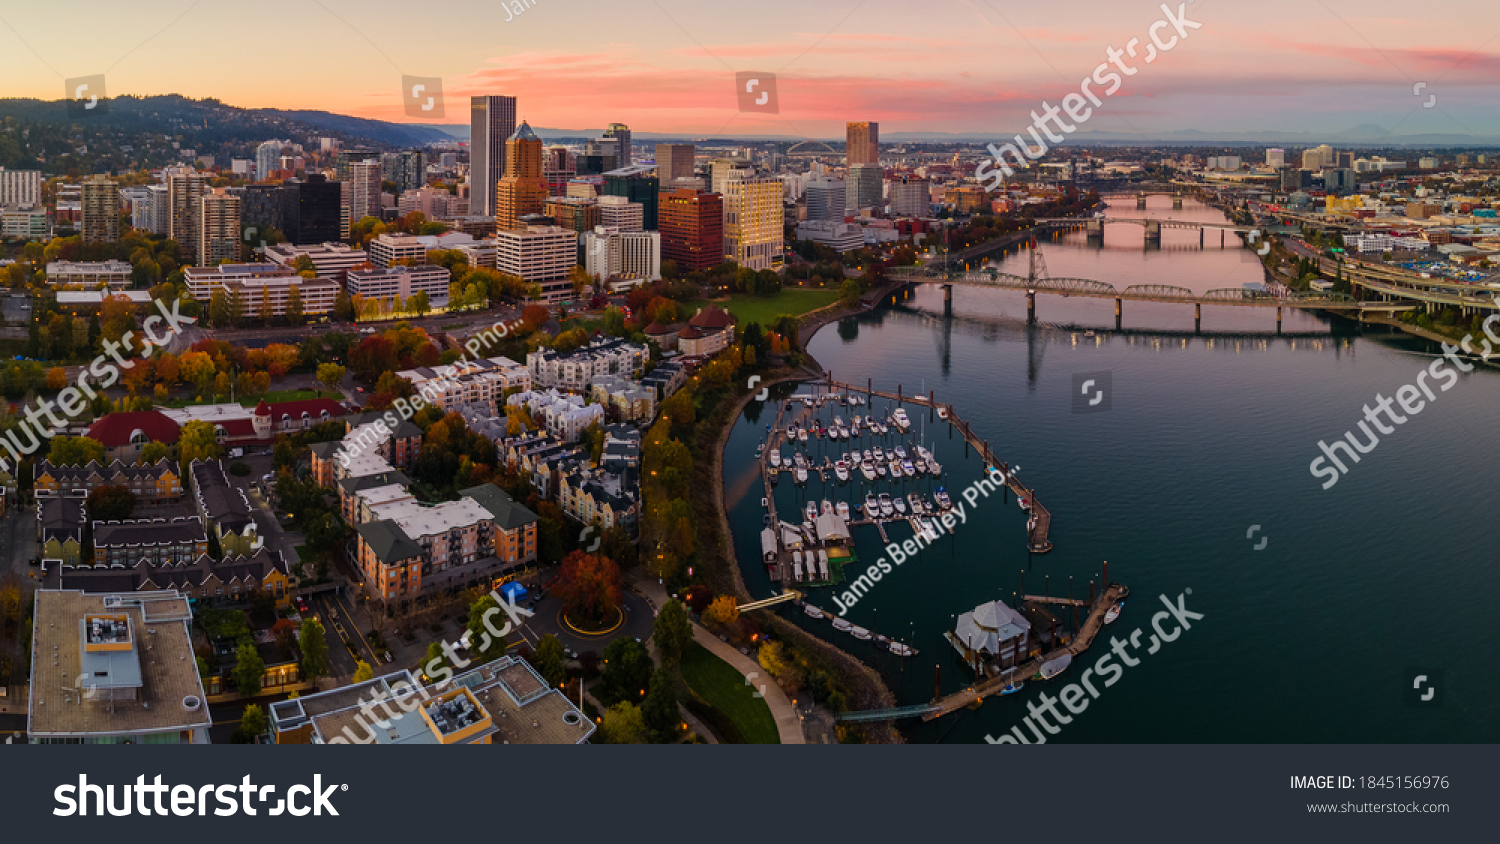 Sunset in Downtown Portland Oregon #1845156976